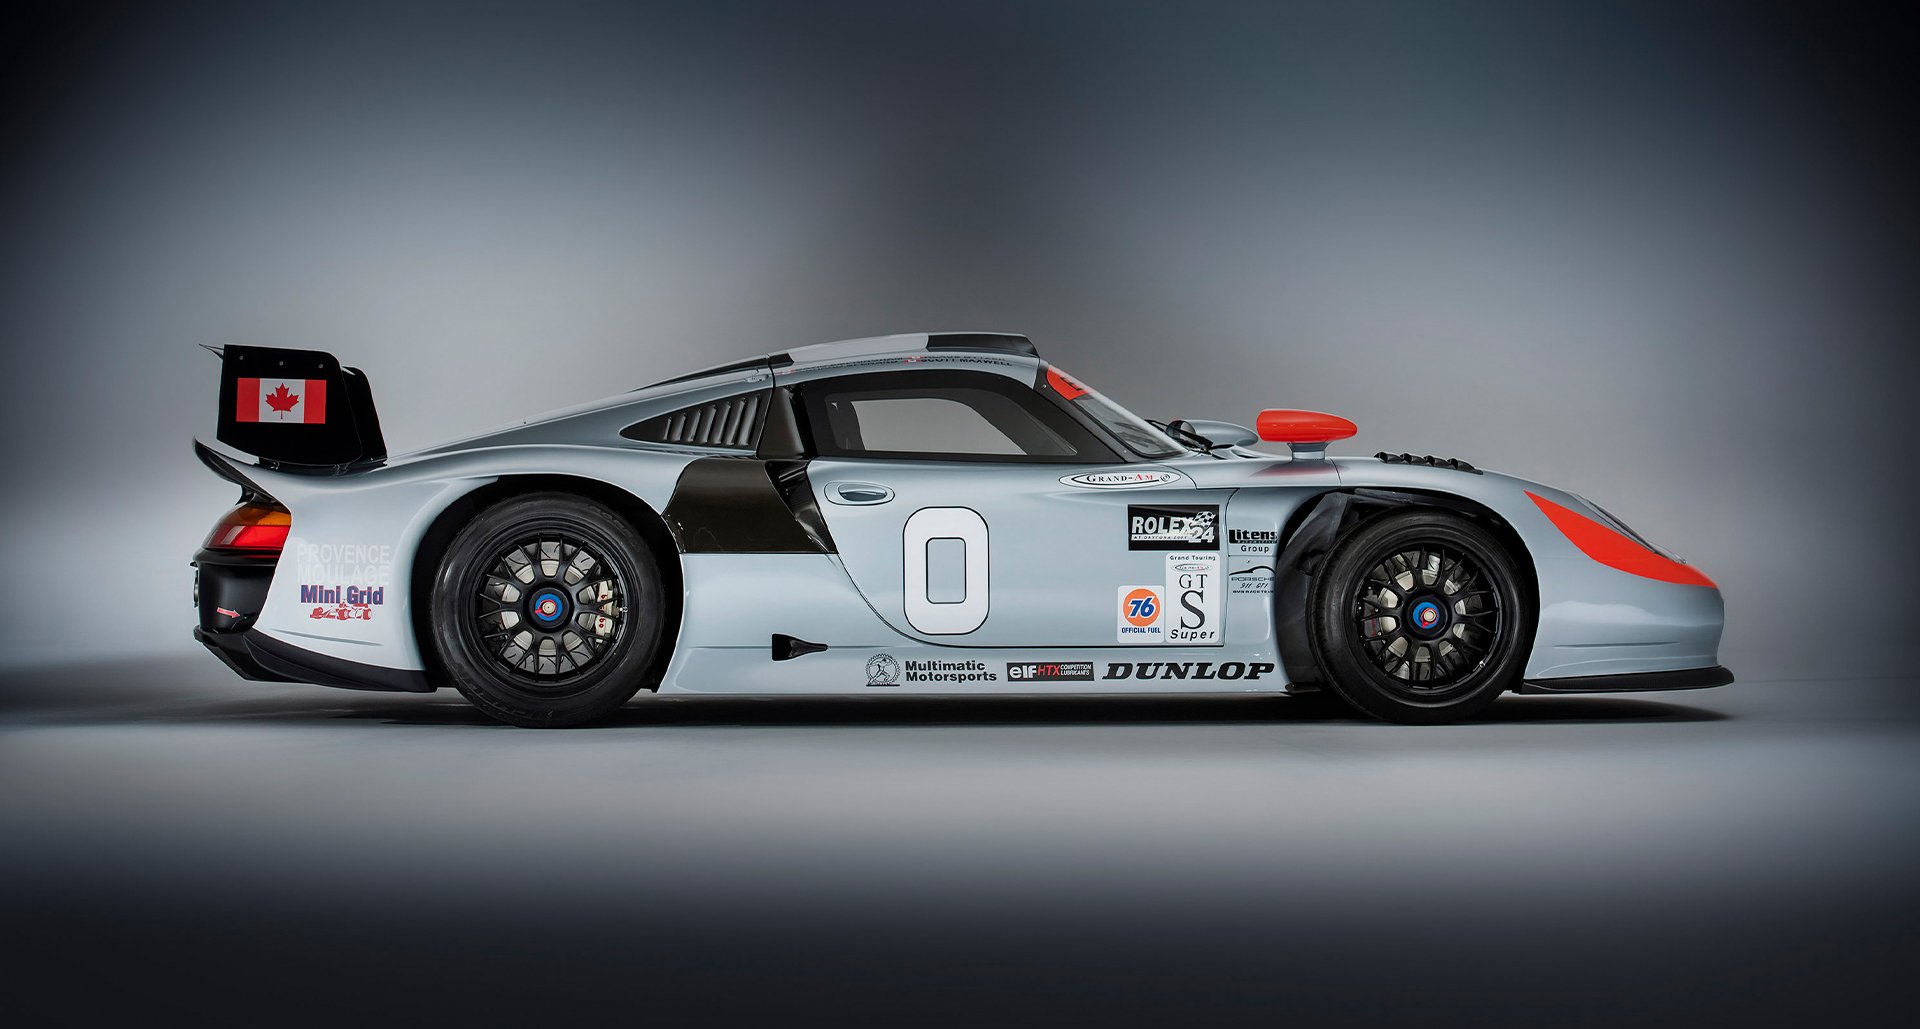 This road-legal Porsche 911 GT1 EVO racer is sweeter than maple syrup